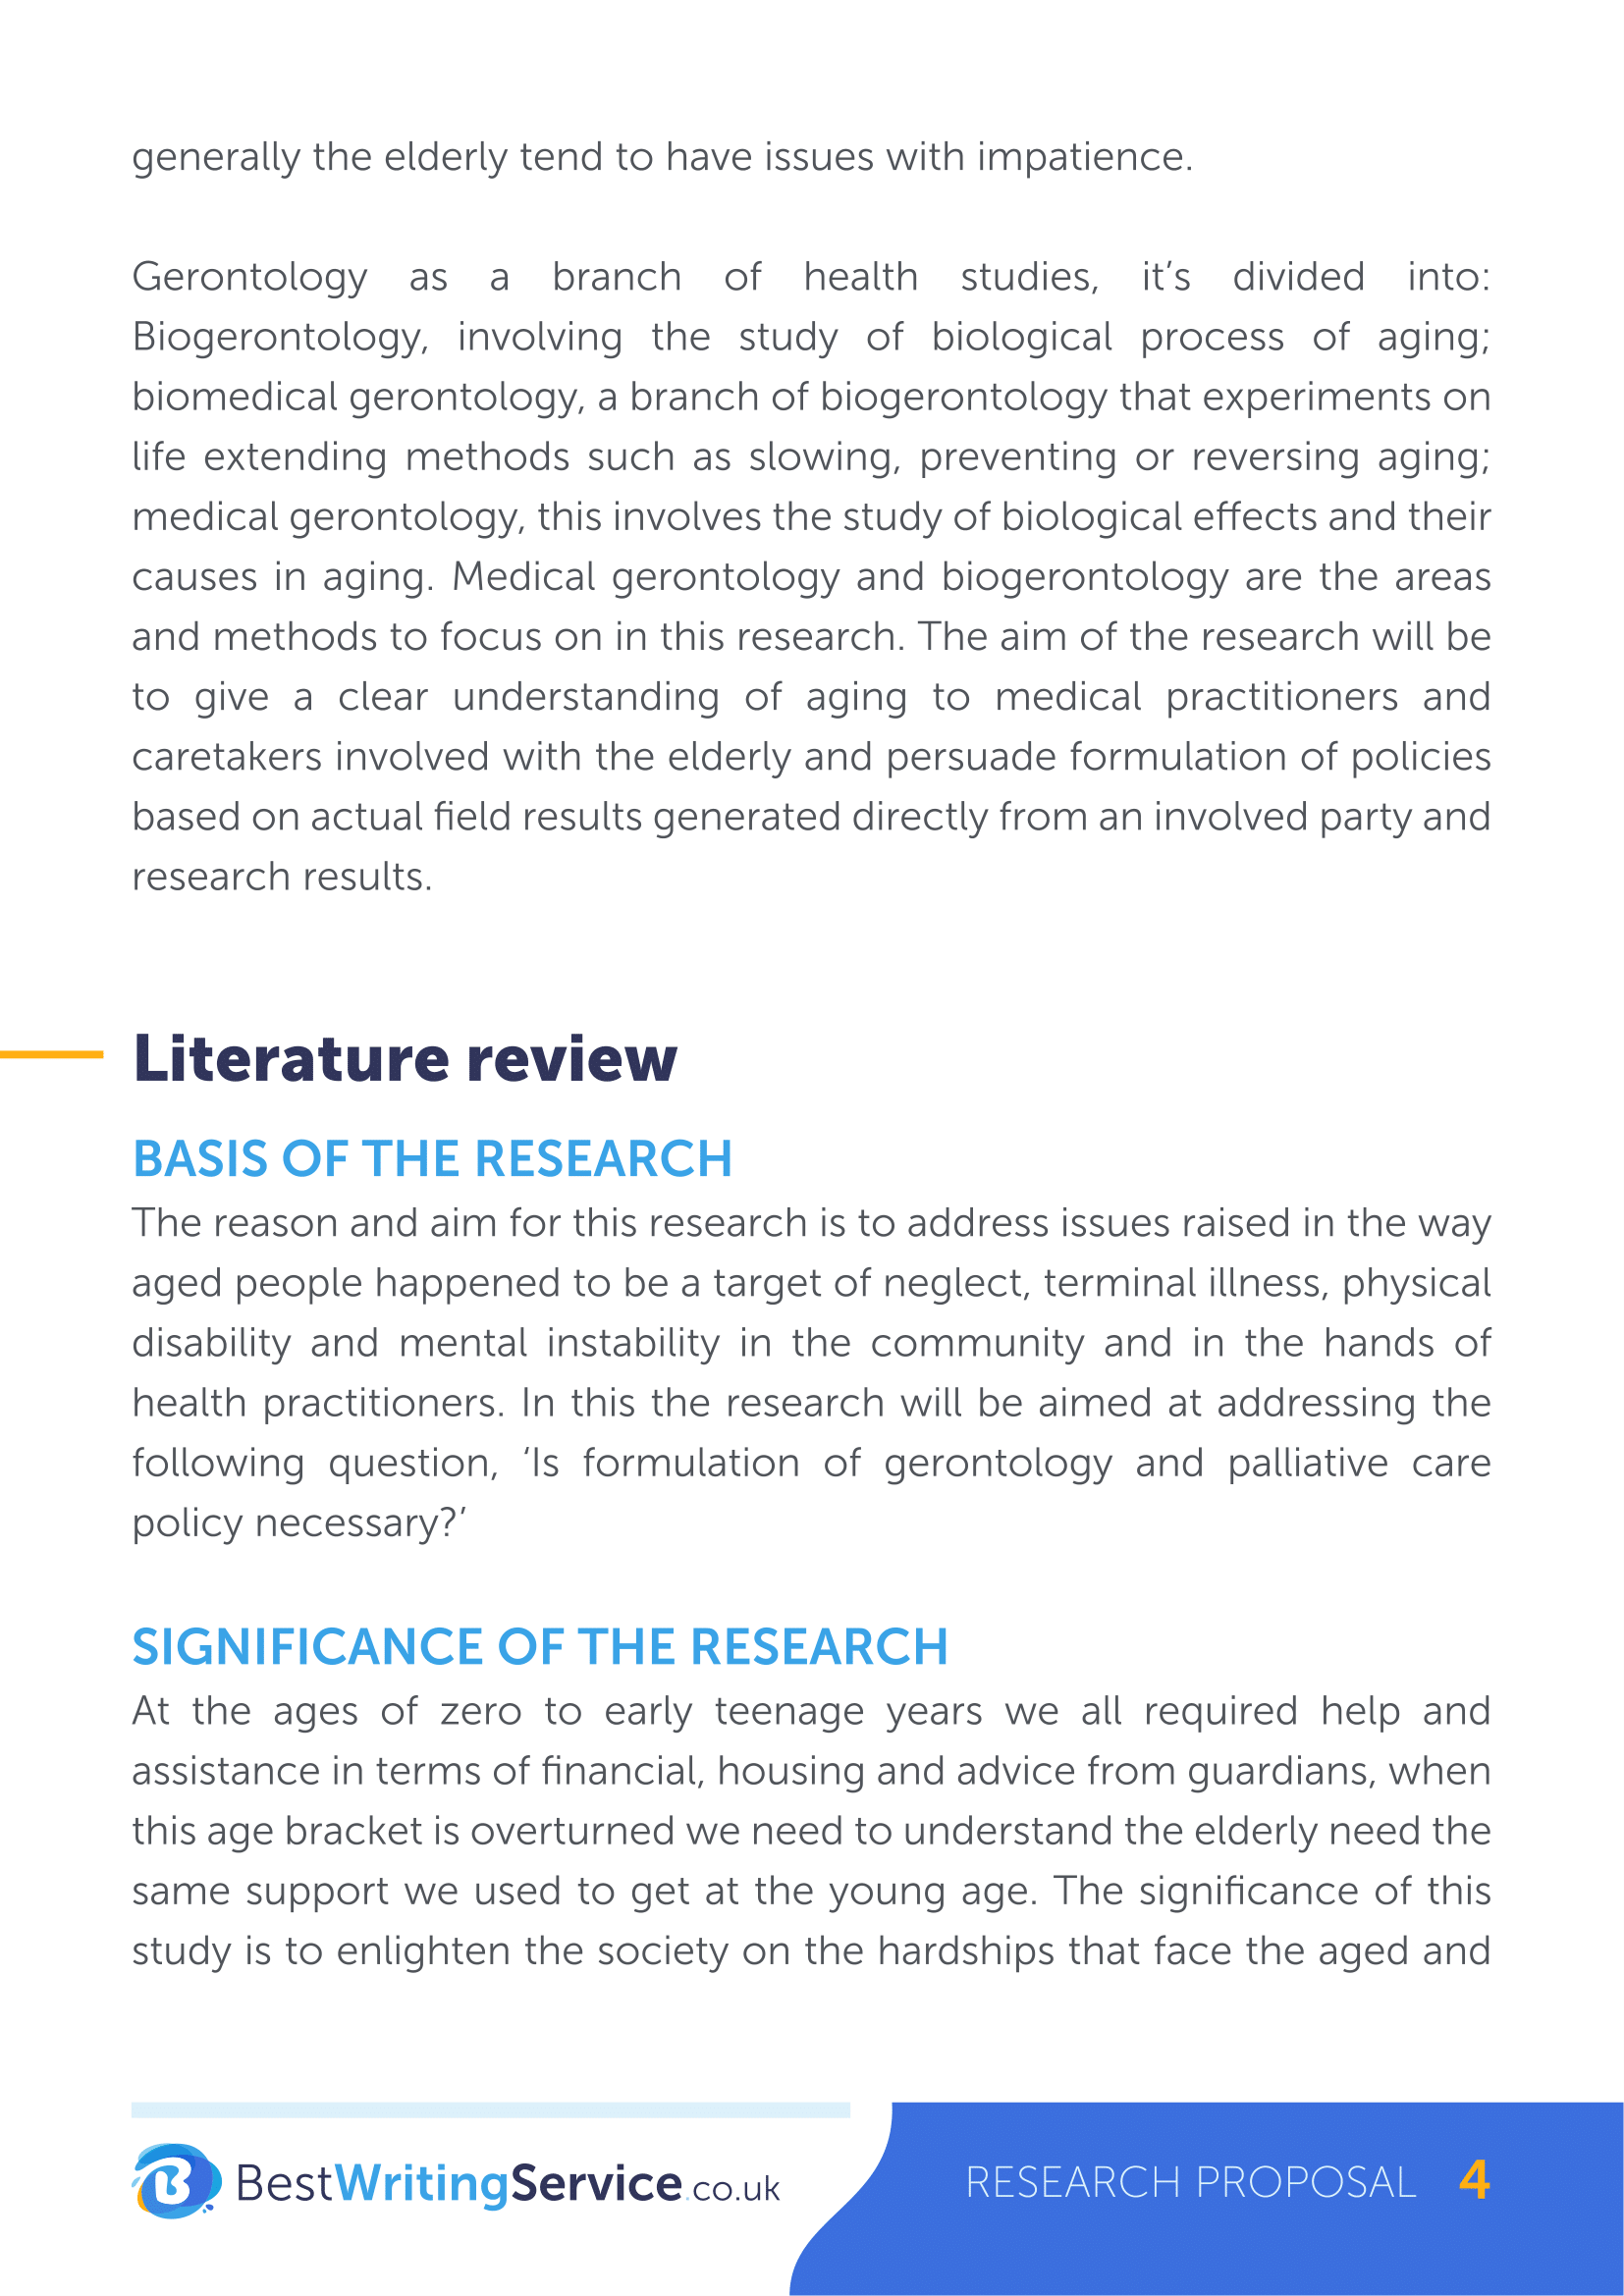 Research proposal essay example